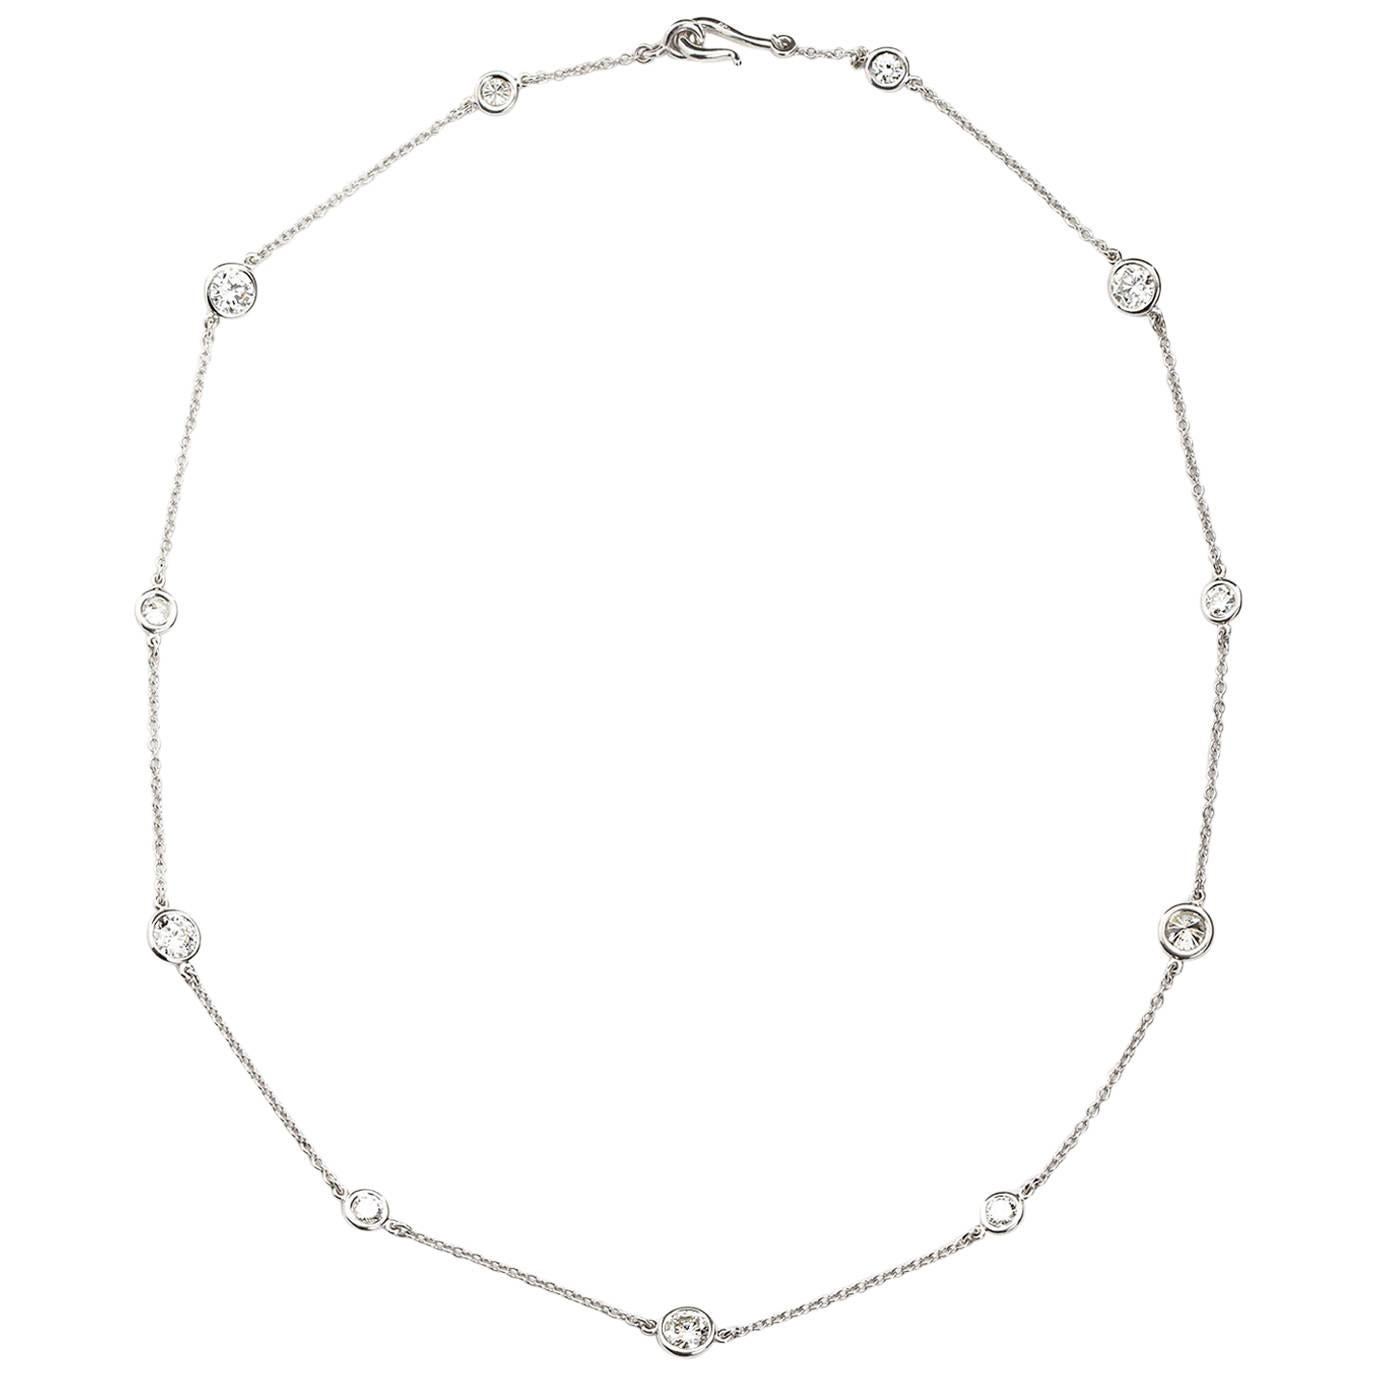 4.80 Carat Diamond by the Yard Necklace